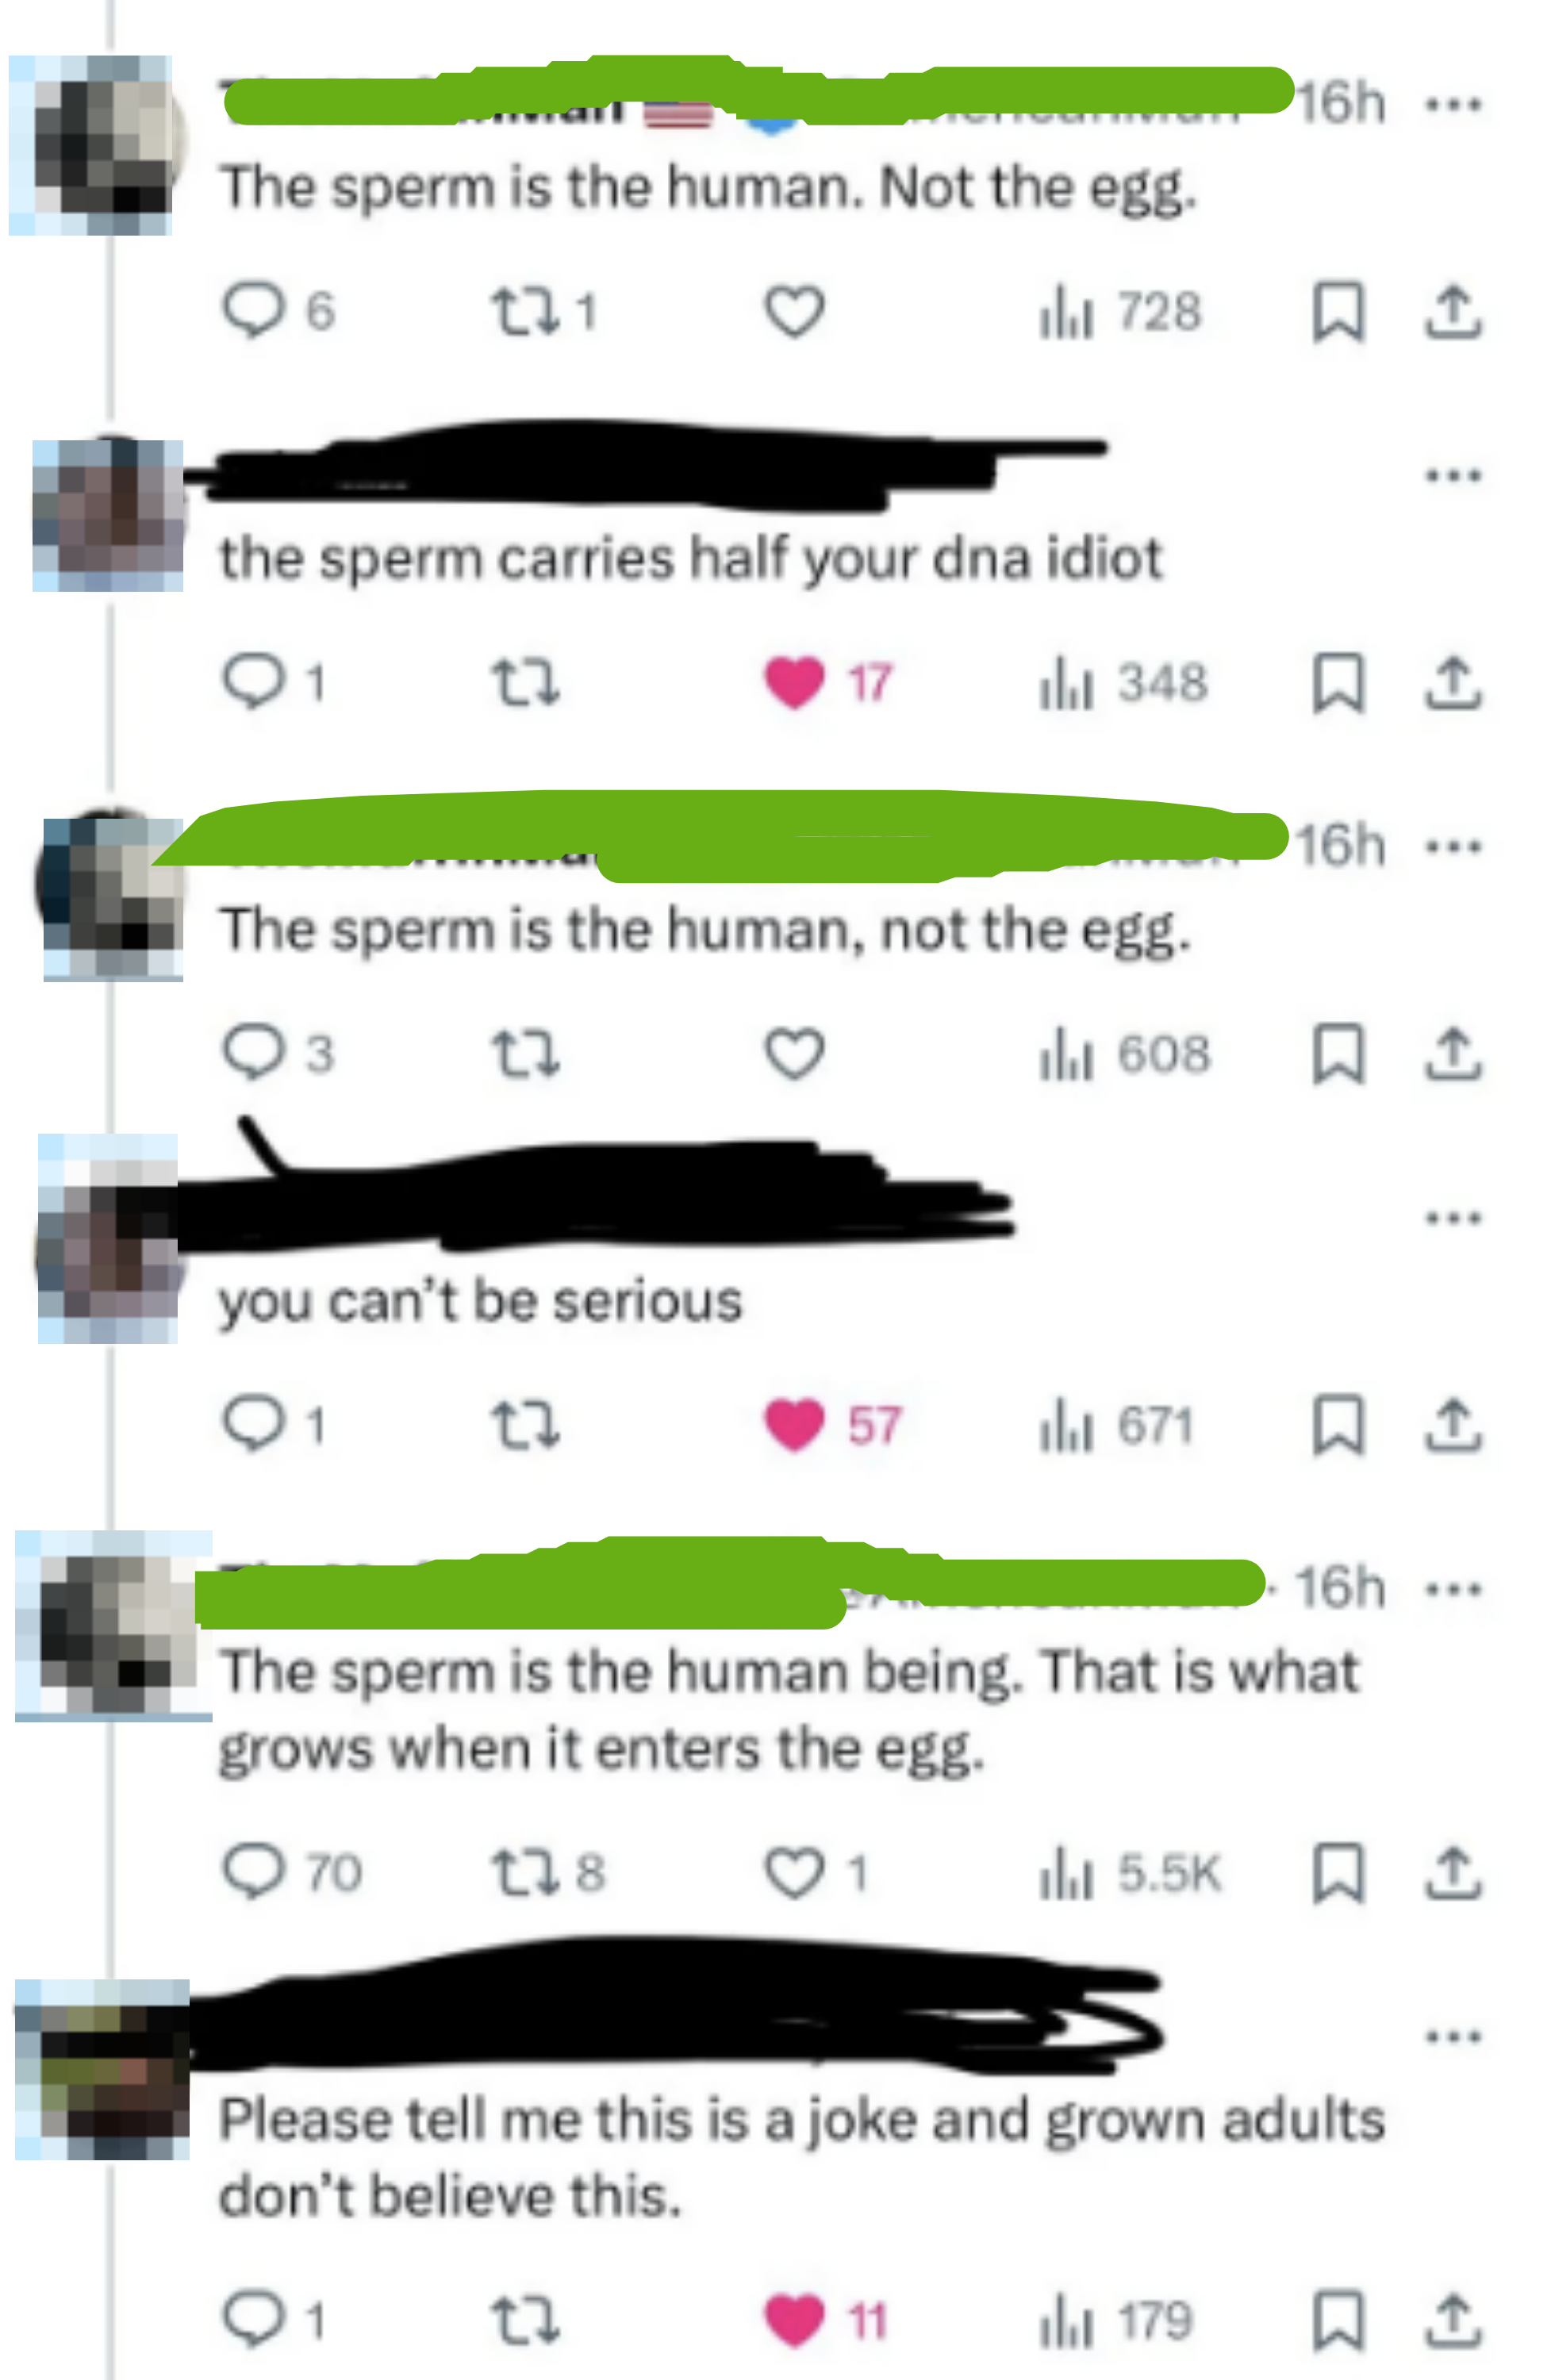 A Twitter thread discussing whether the sperm or the egg carries human DNA, with varying opinions and reactions